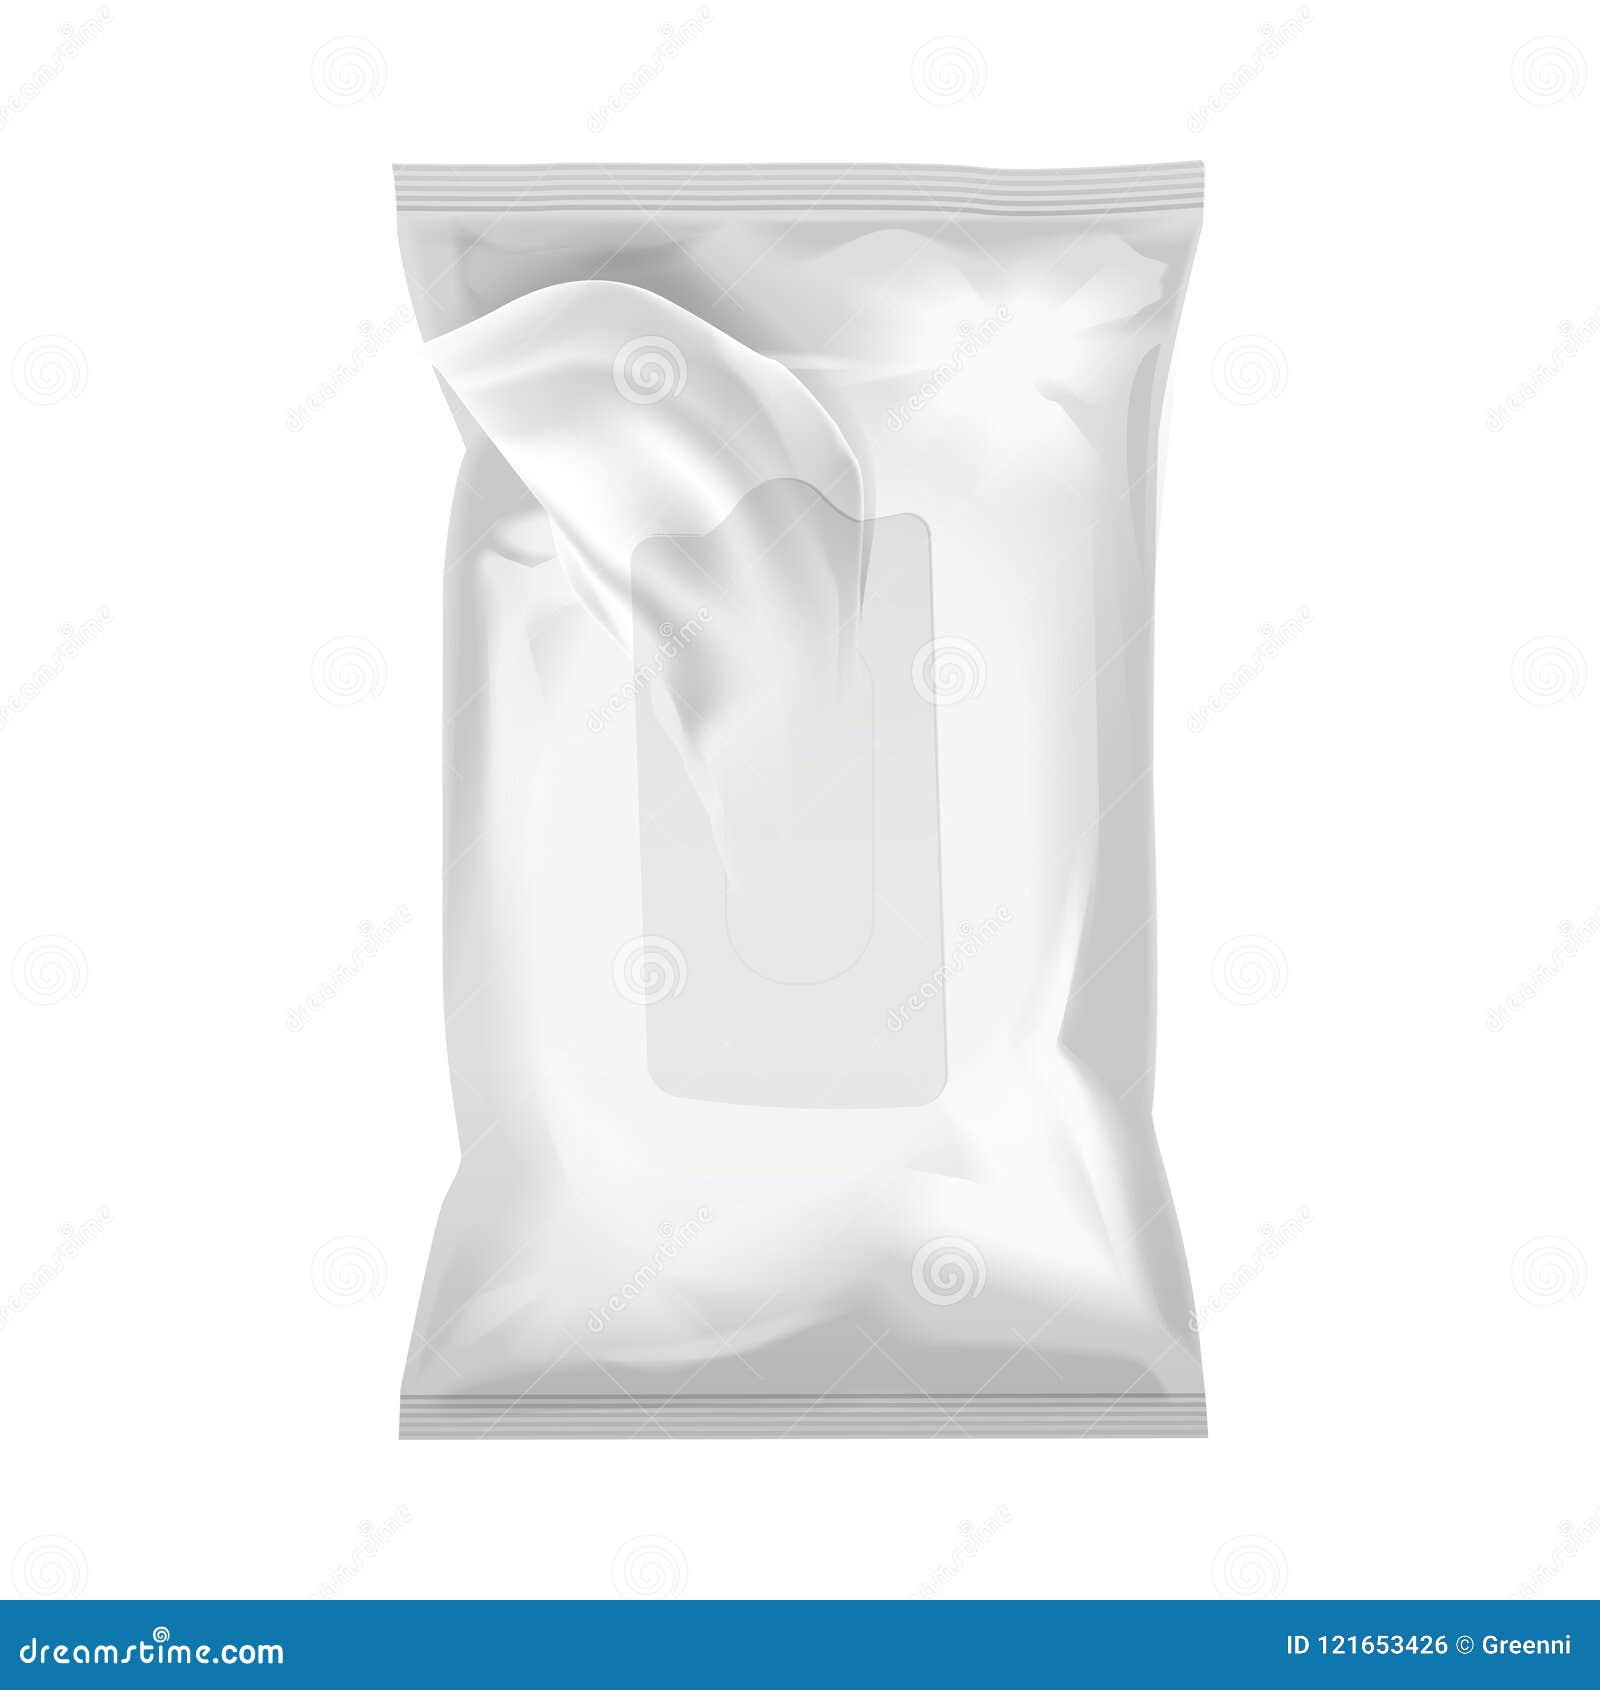 Download Vector Mockup Of Wet Wipe Flow Pack With Realistic Transparent Shadows Stock Vector Illustration Of Clear Hygiene 121653426